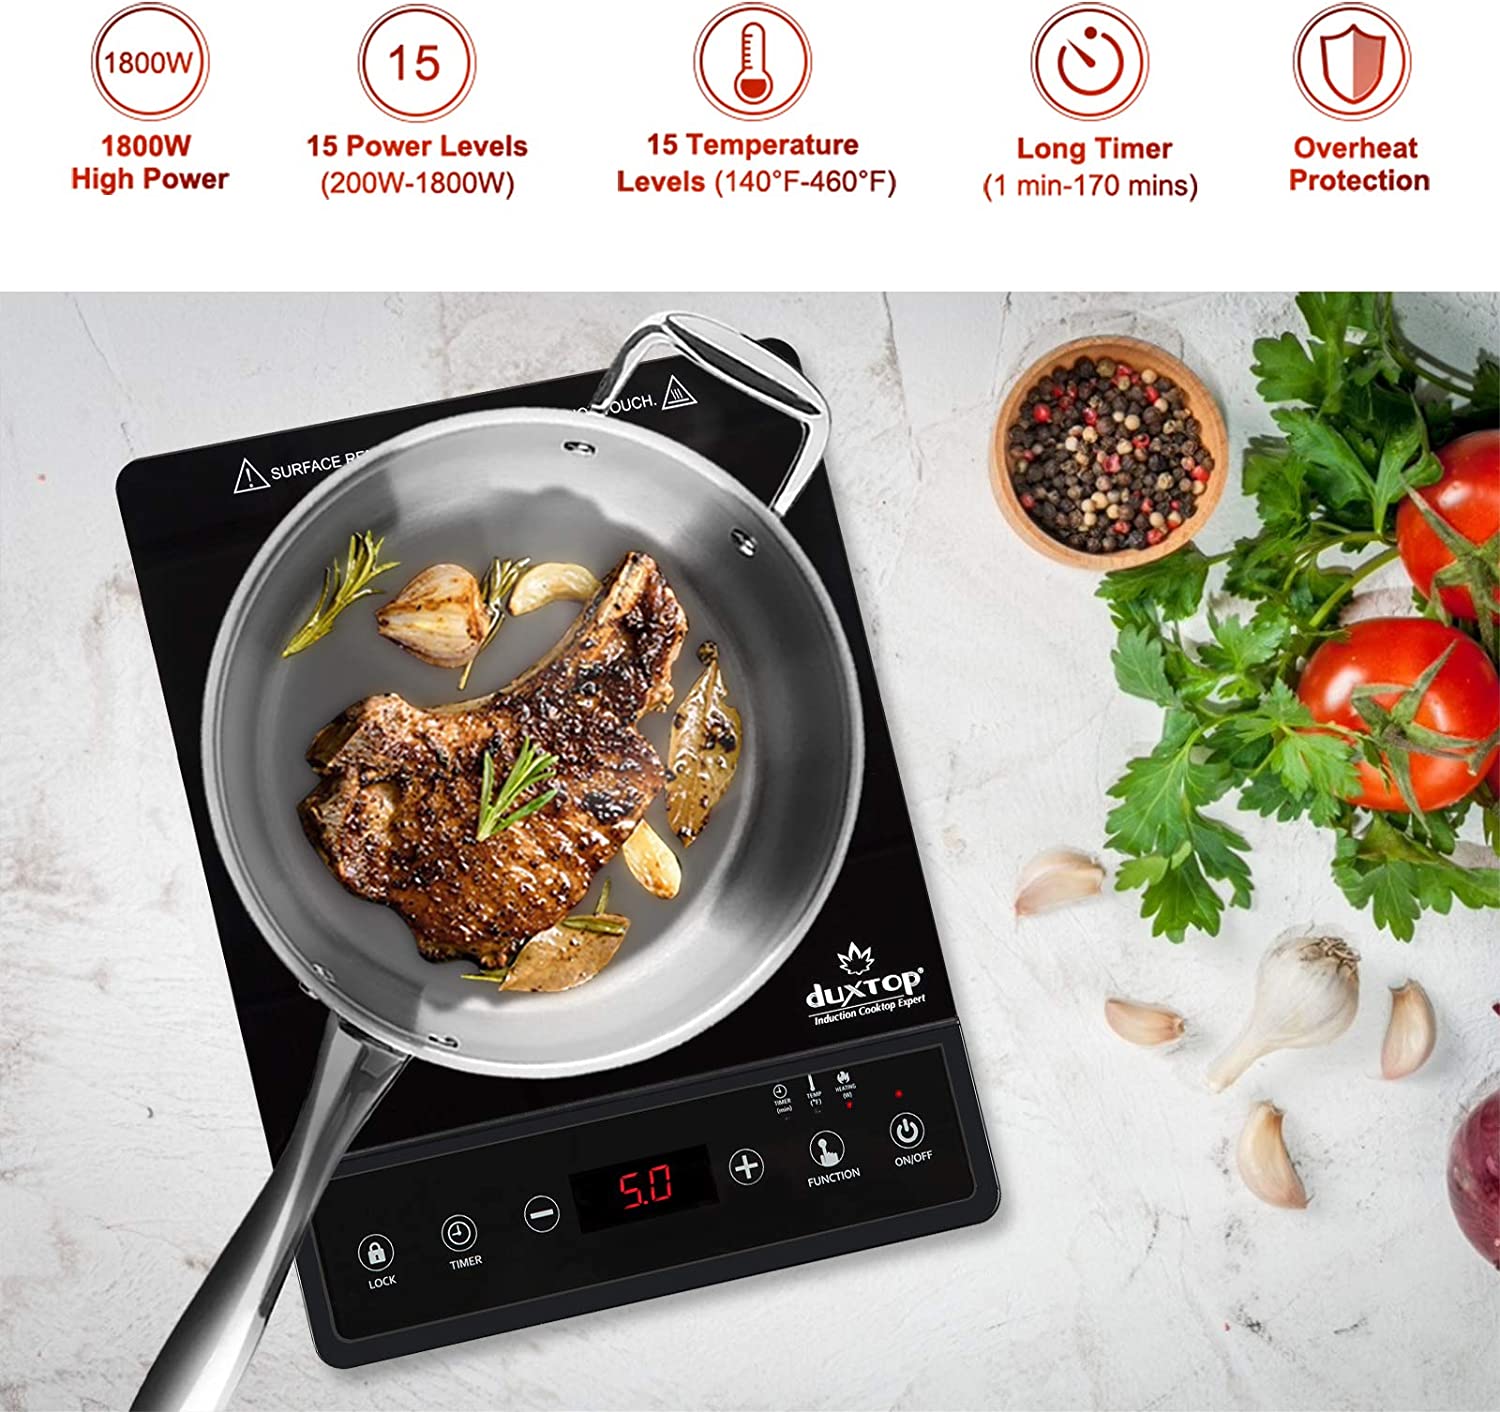 Duxtop Portable Induction Cooktop, Countertop Burner Induction Hot Plate  with LCD Sensor Touch 1800 Watts, Black & Professional Stainless Steel